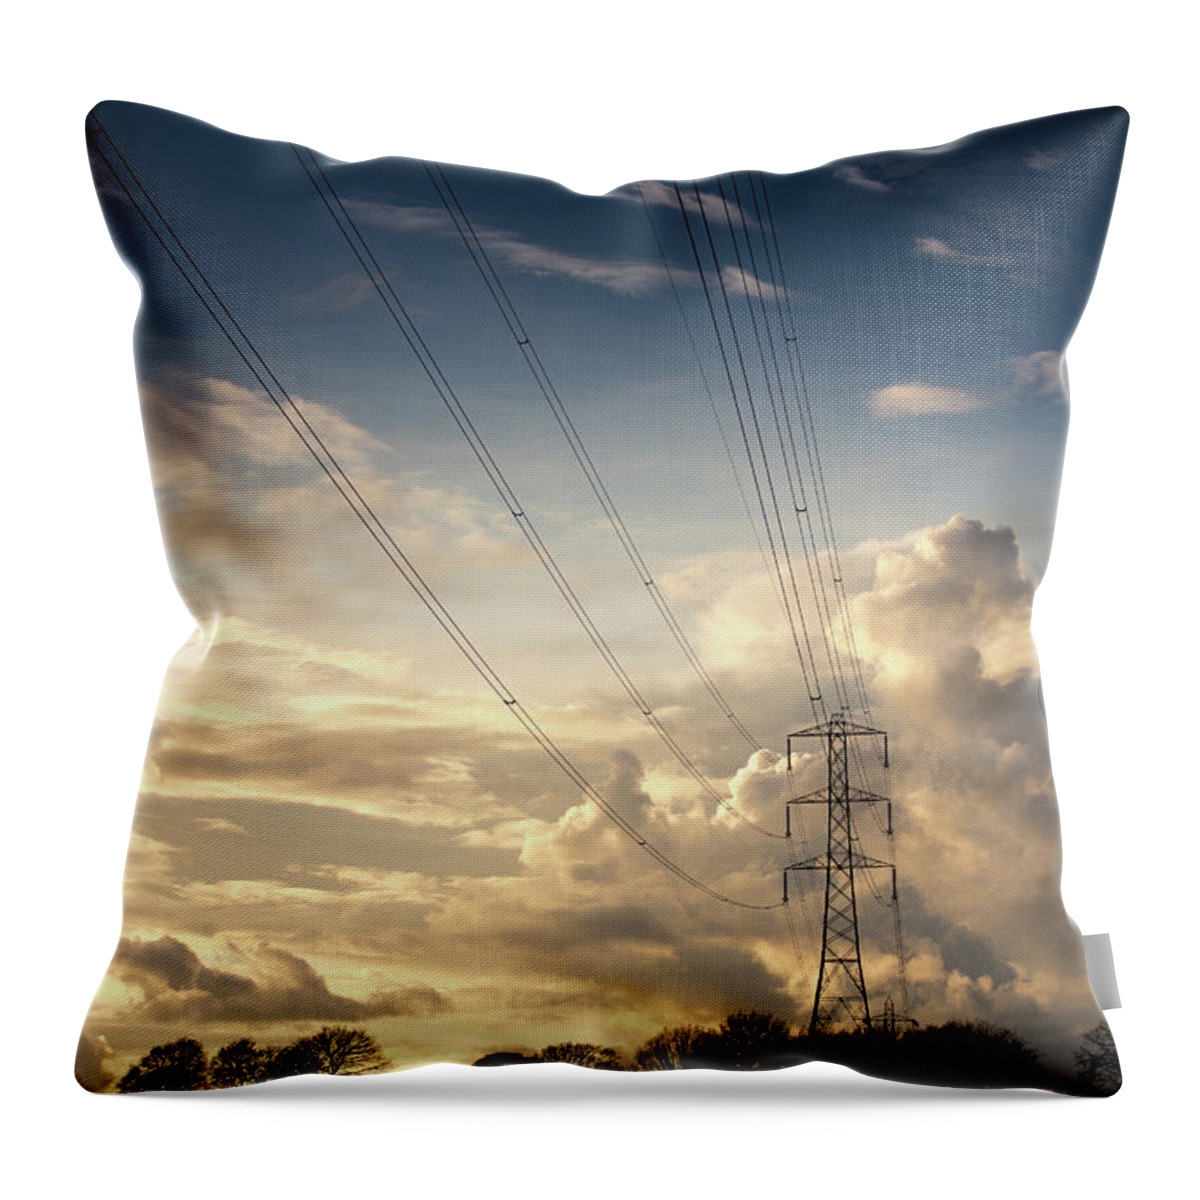 Electricity Pylon Throw Pillow featuring the photograph Electric Pylon by Peter Chadwick Lrps